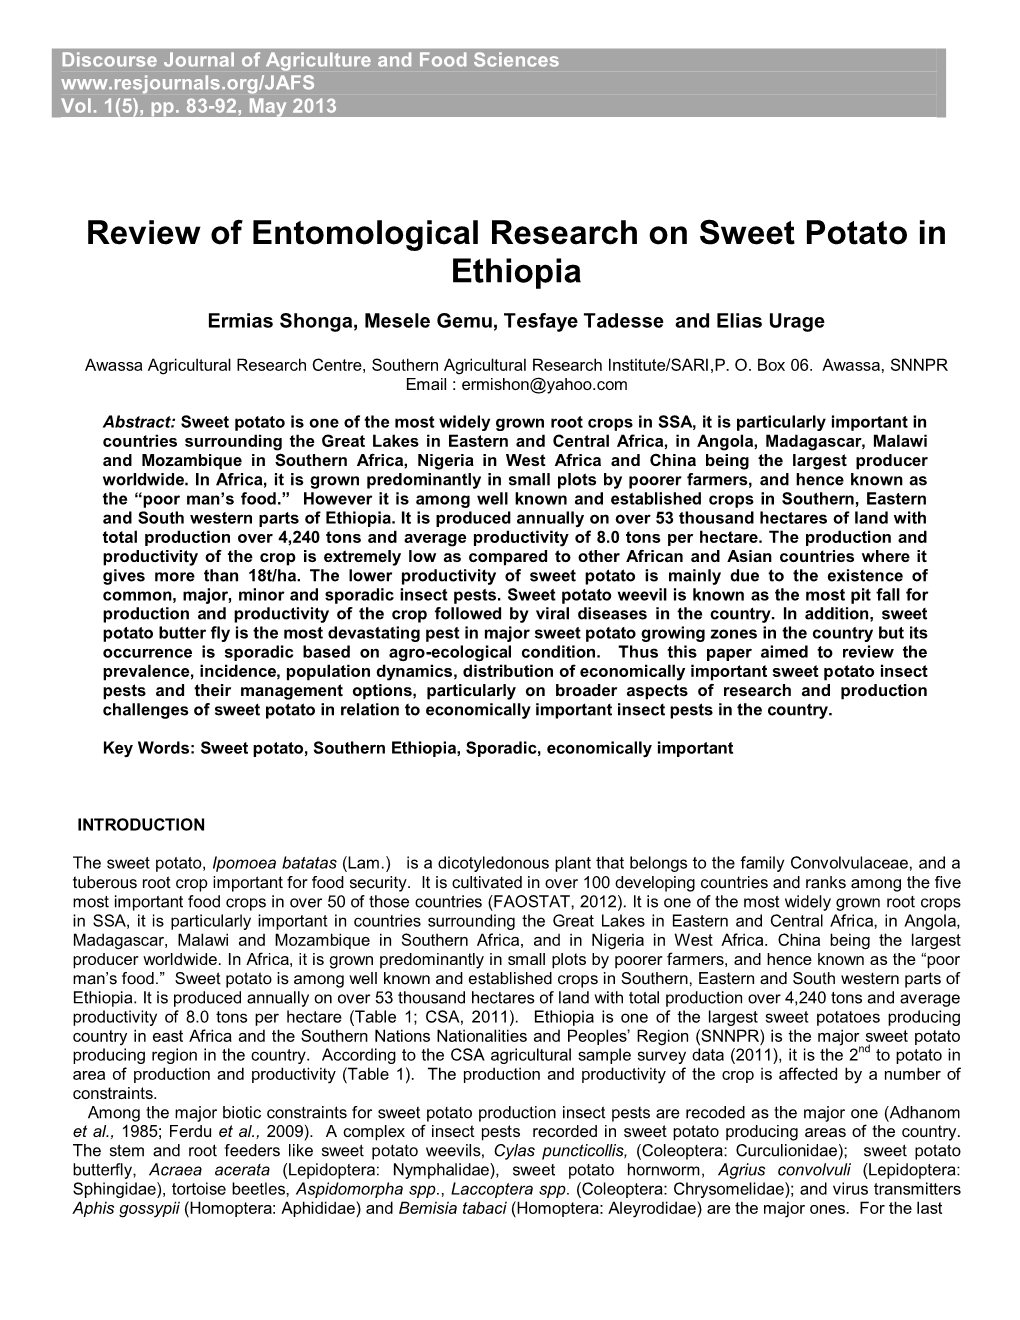 Review of Entomological Research on Sweet Potato in Ethiopia